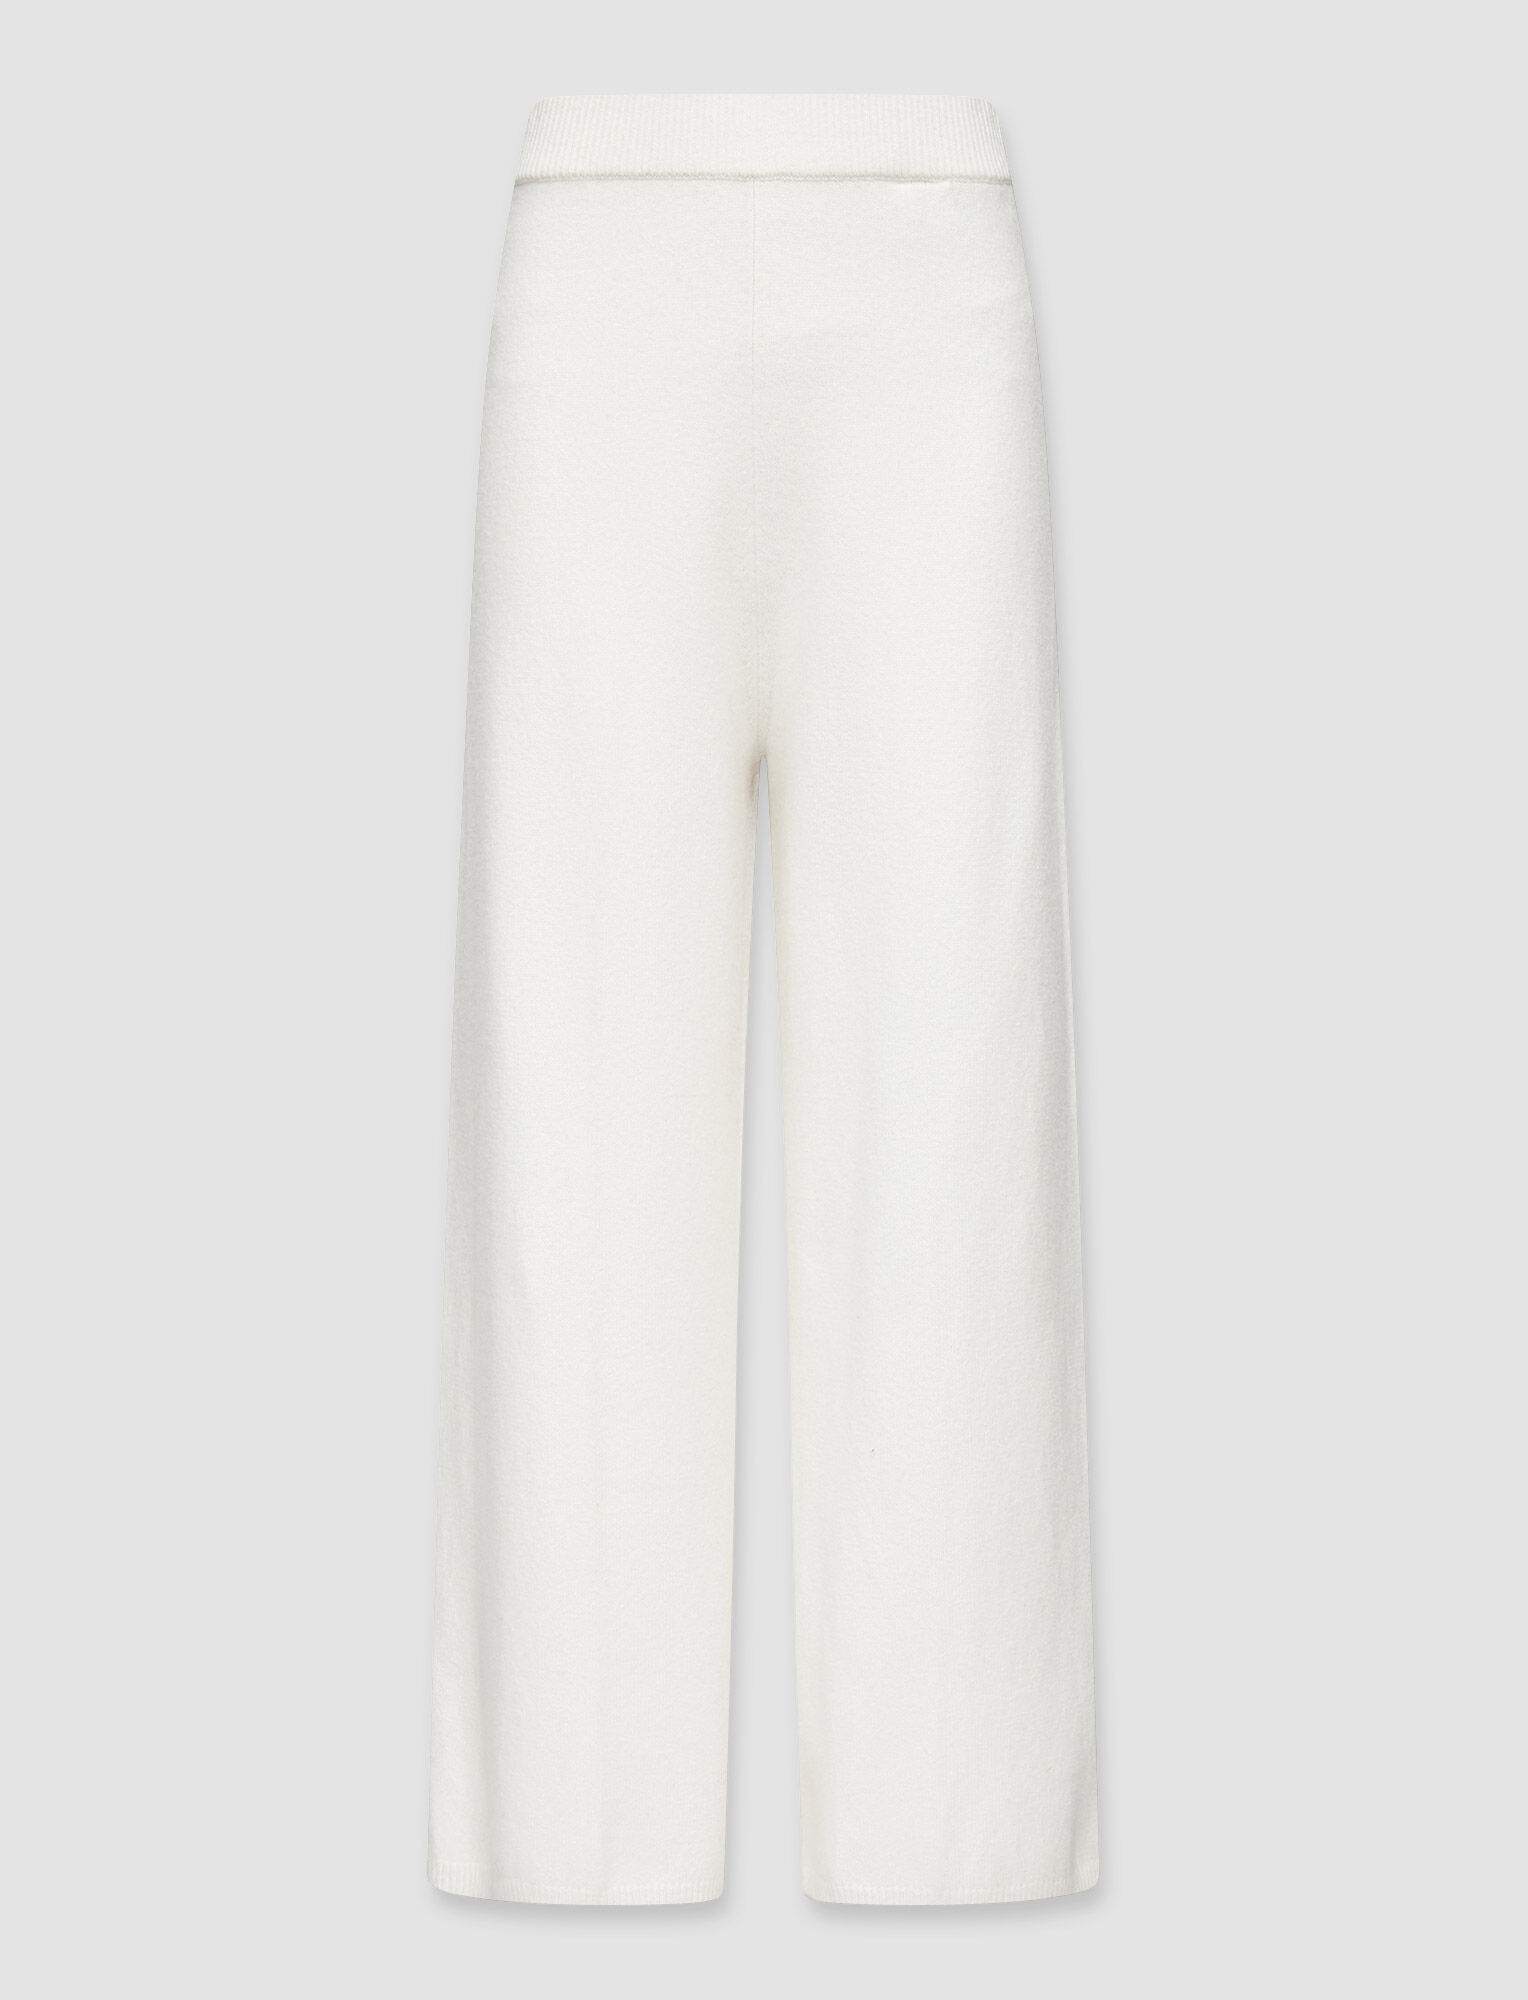 Joseph, Cosy Wool Cashmere Trousers, in Ivory